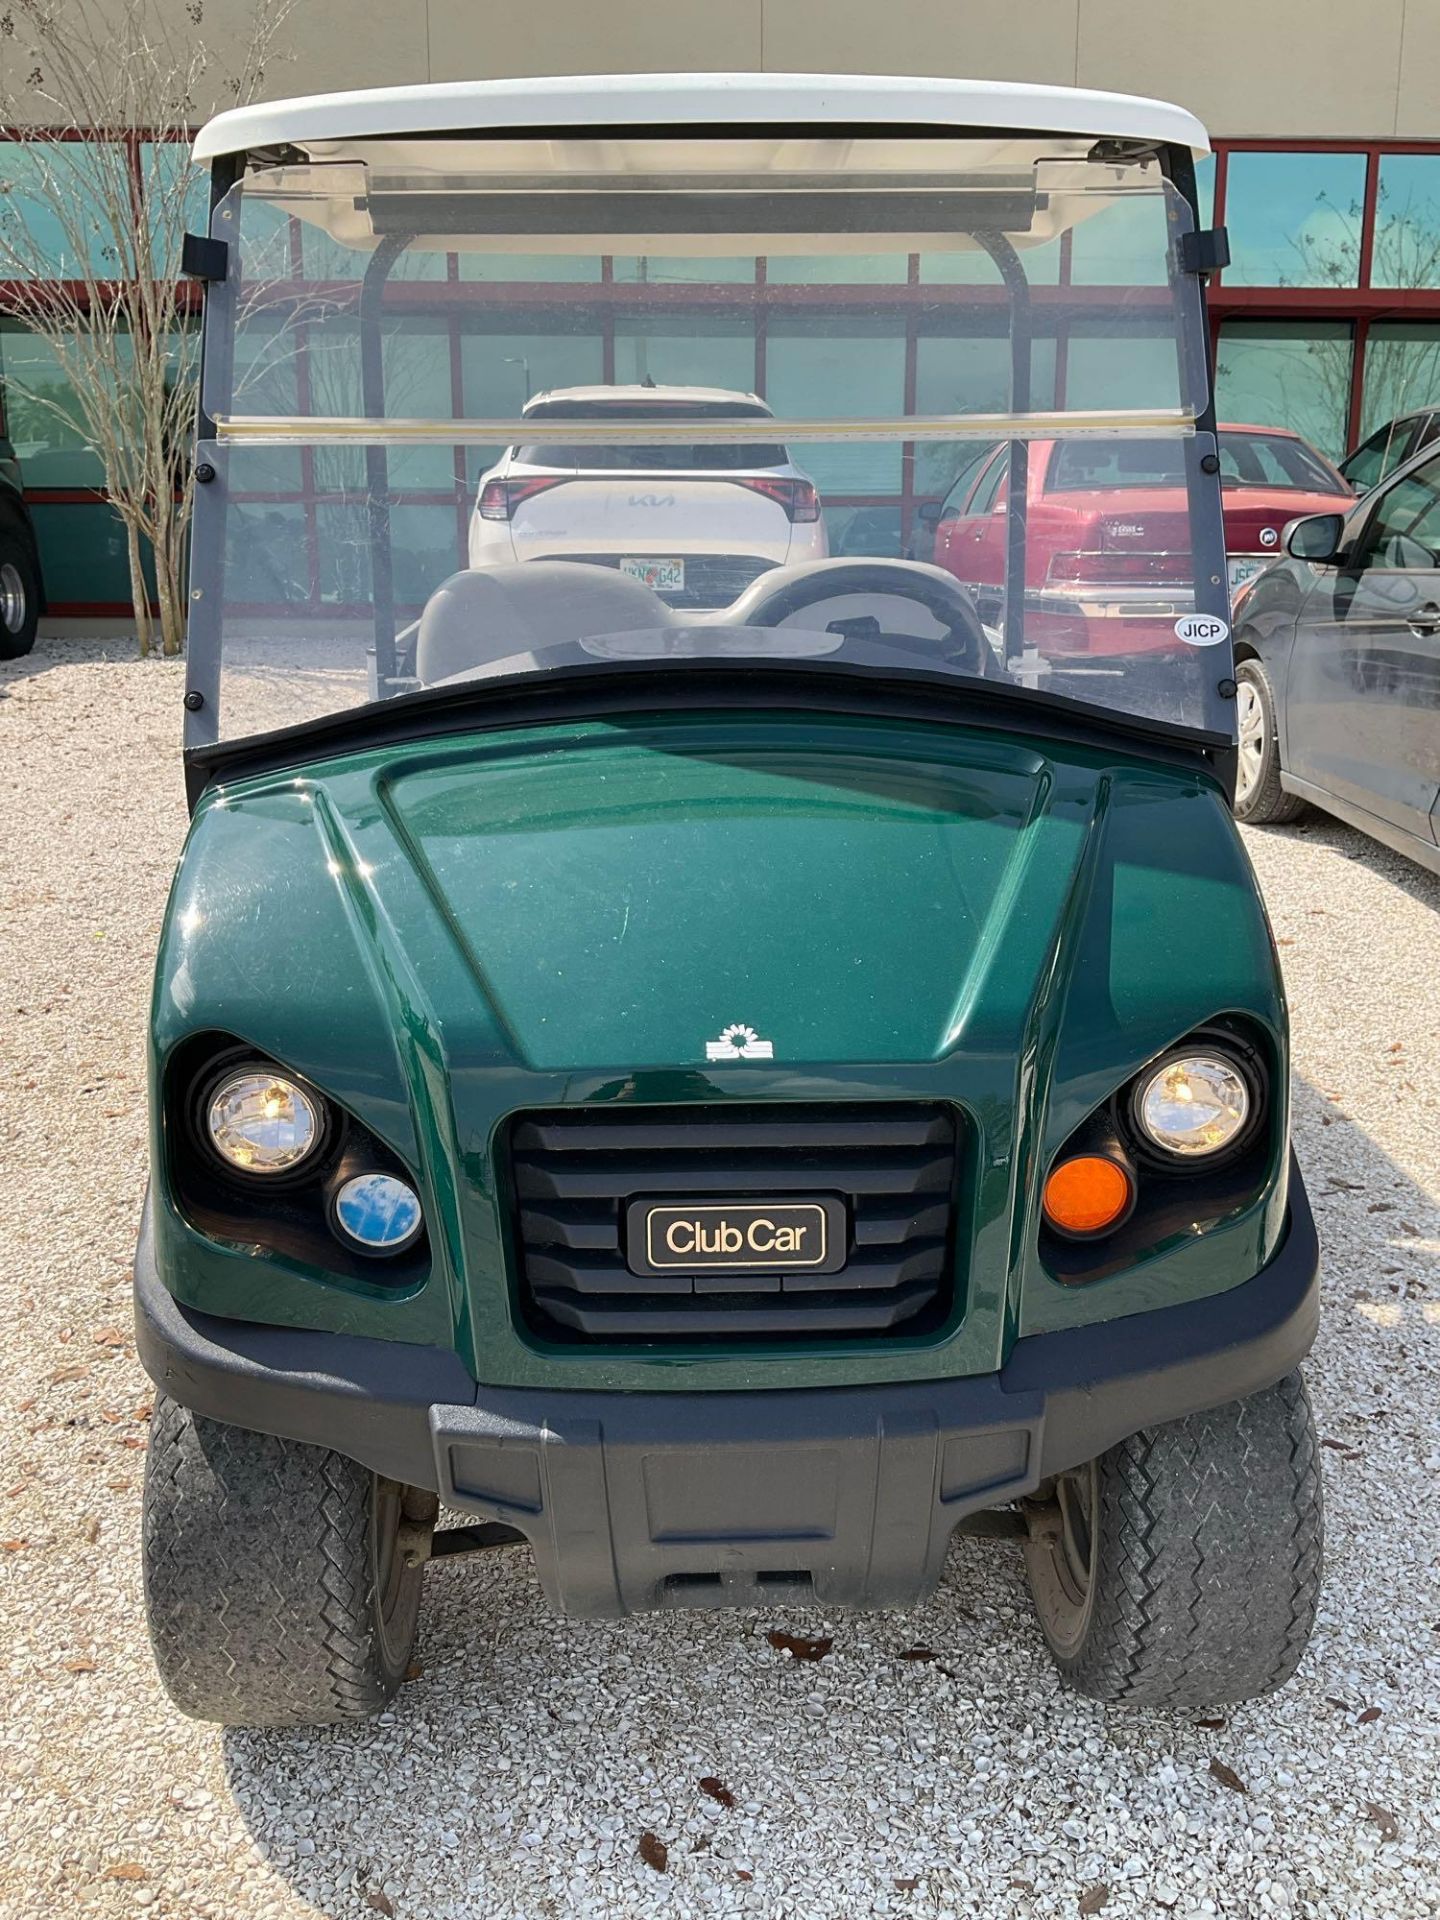 2018 CLUB CAR CARRYALL 300 ATV MODEL CA300 , ELECTRIC , MANUEL DUMP BED, BATTERY CHARGER INCLUDED... - Image 9 of 13